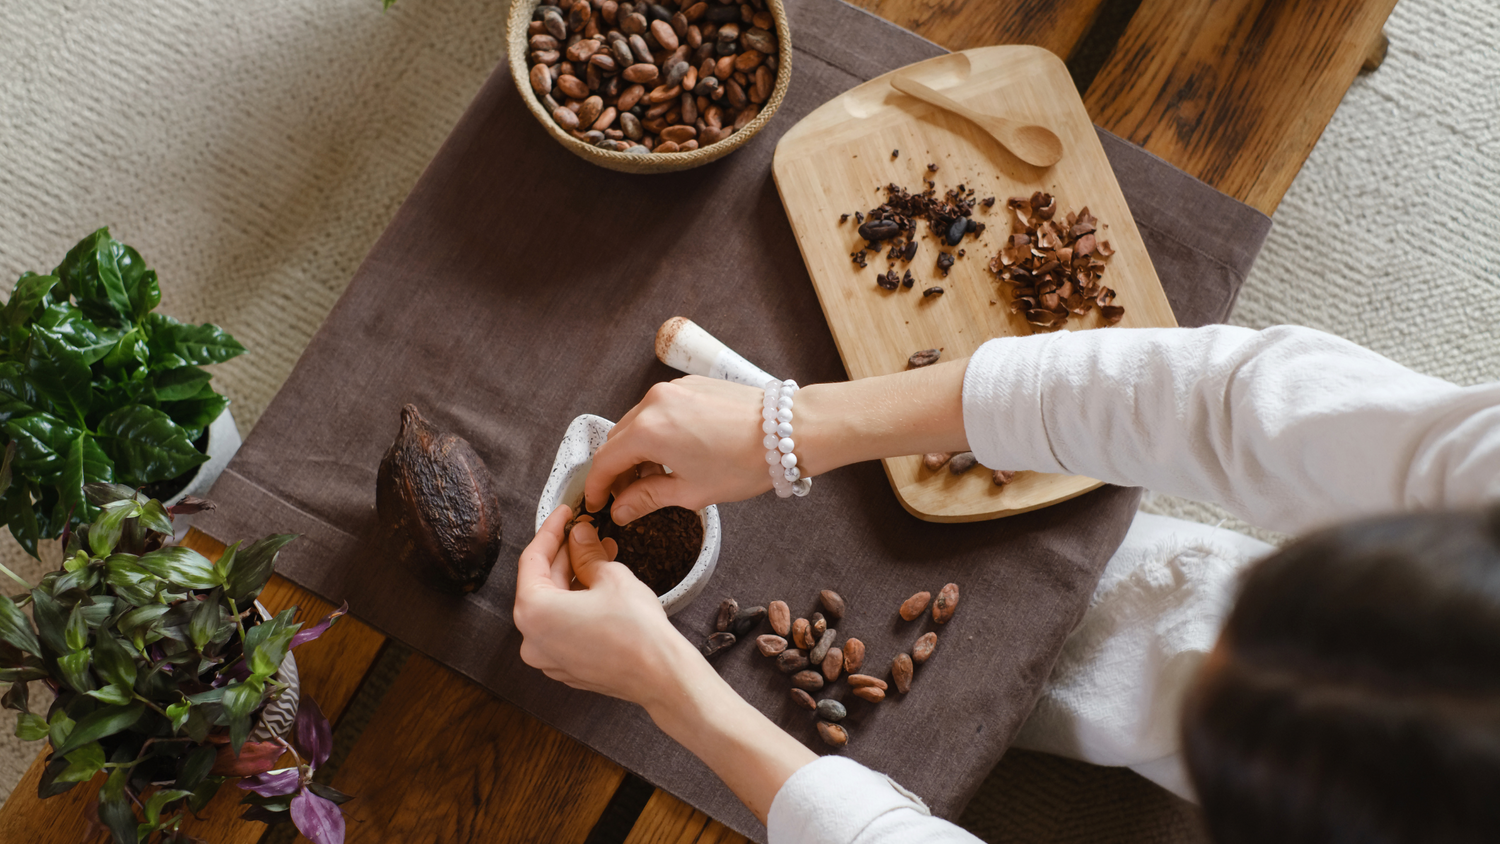 Your Sweet Tooth is Calling - Cannabis Infused Dark Chocolate and Cacao Bark